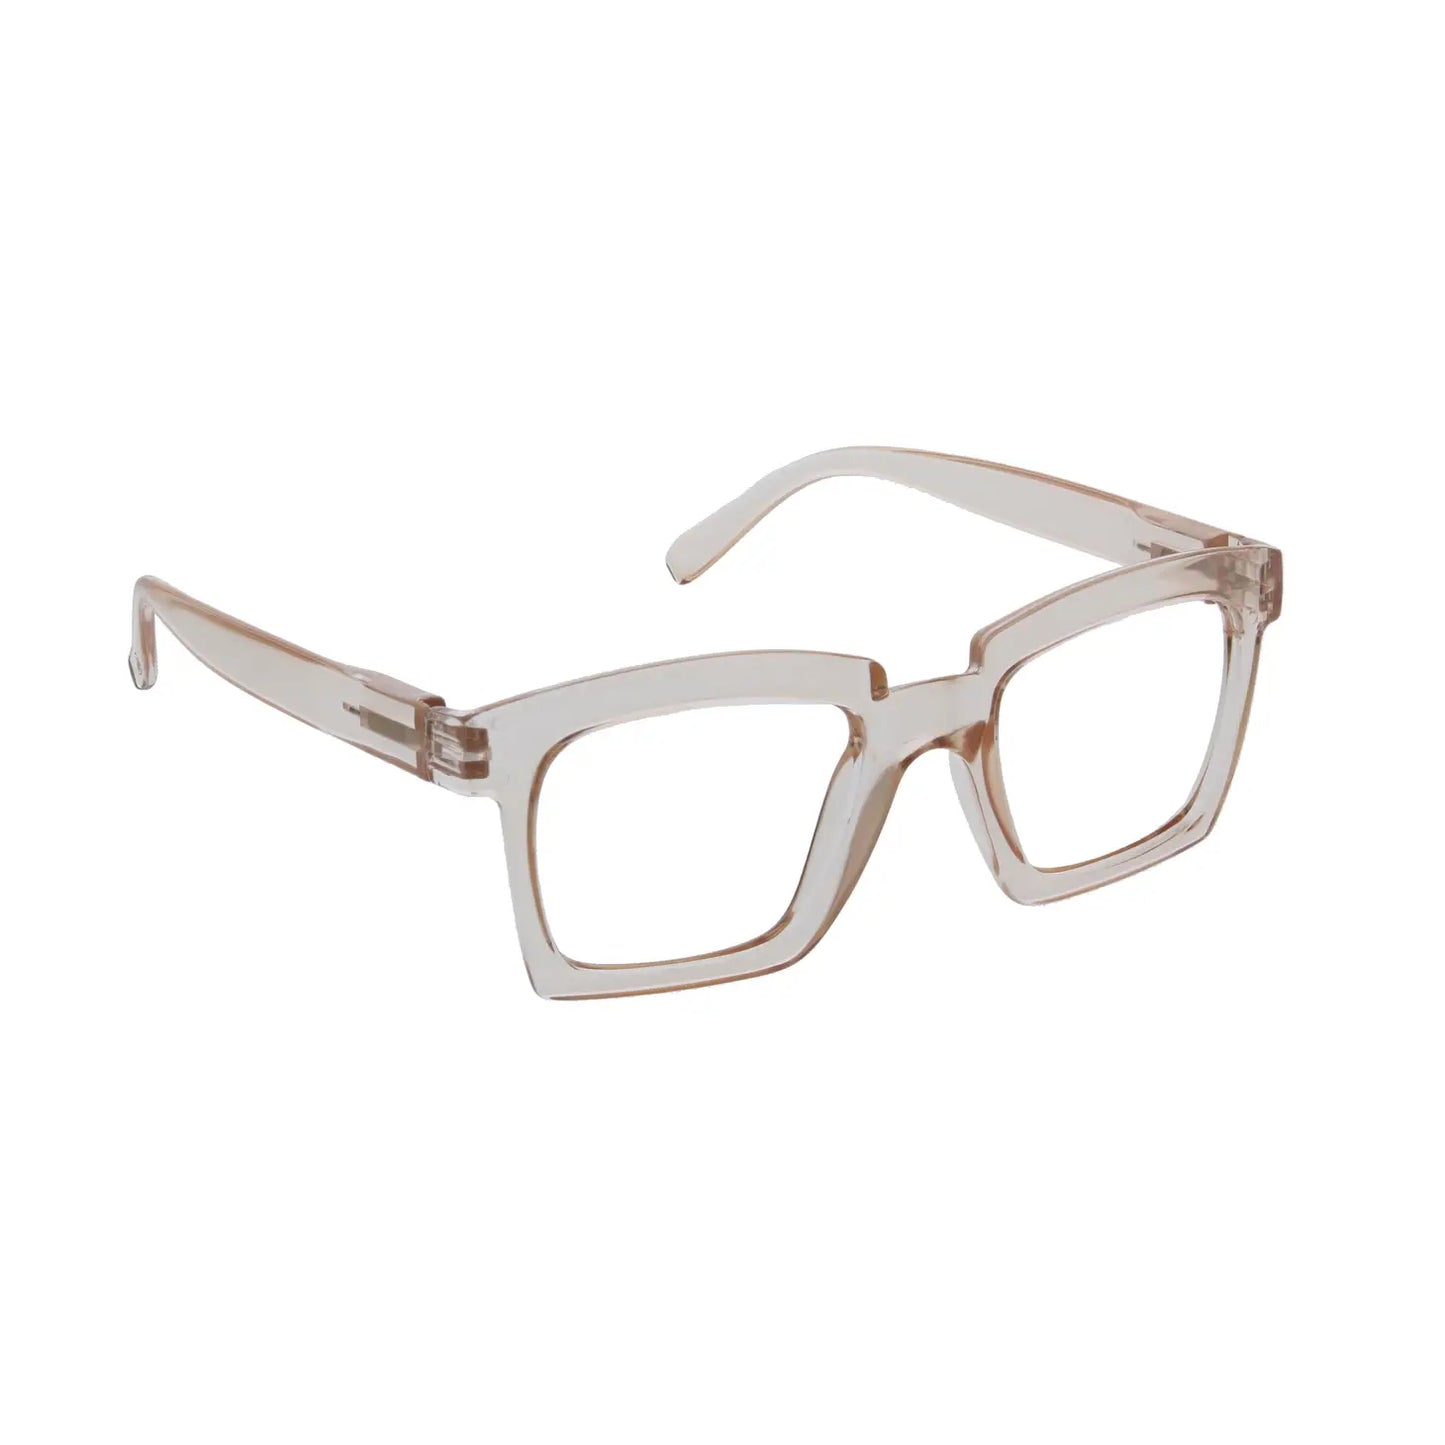 Peepers Standing Ovation Blue Light Glasses - Tan